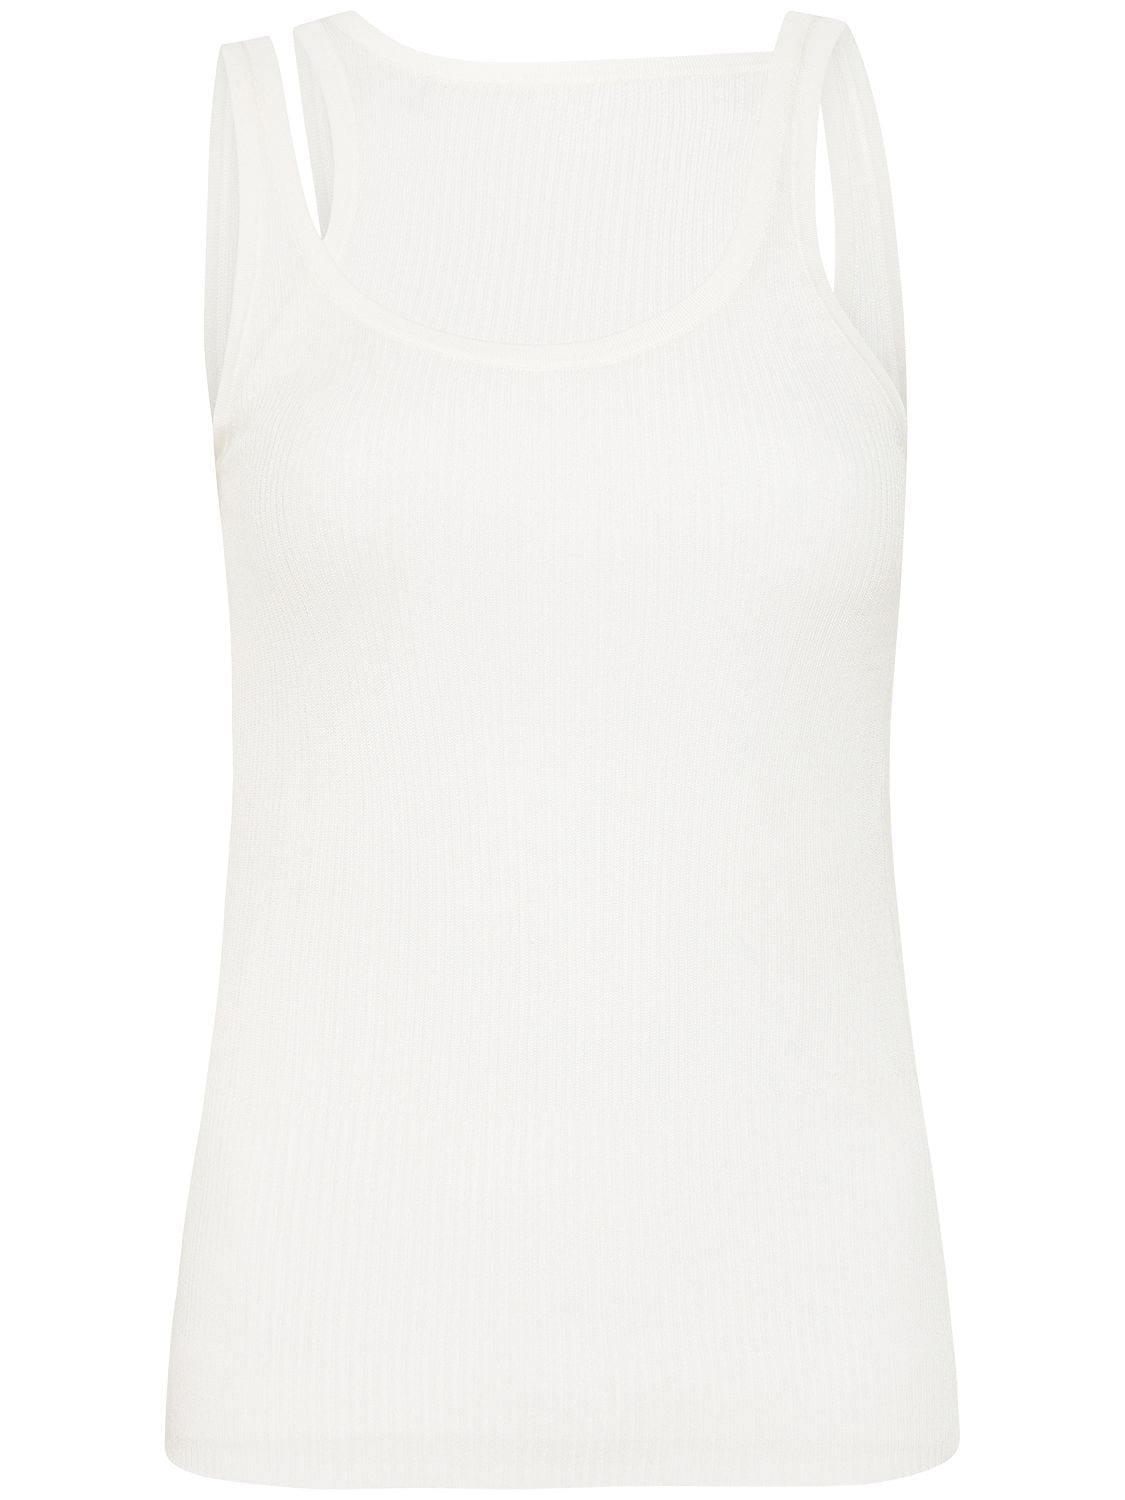 Image of Double-layer Tencel Knit Top